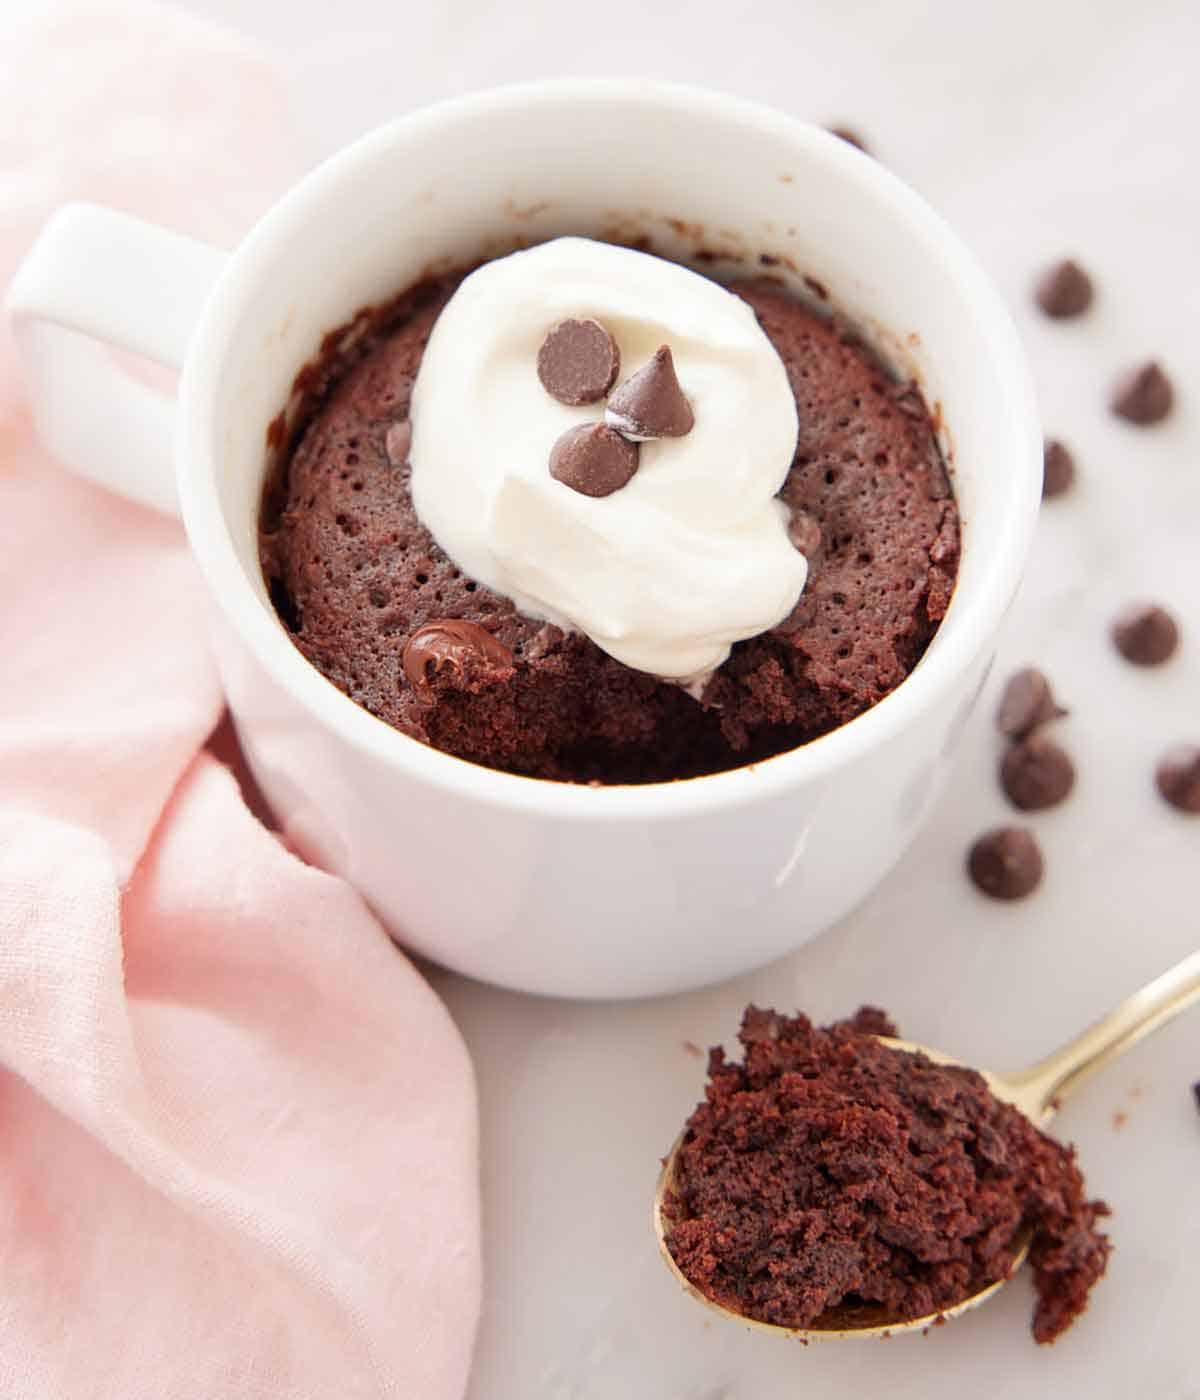 A mug cake with whipped cream and chocolate chips on top with a spoonful scooped out in front.